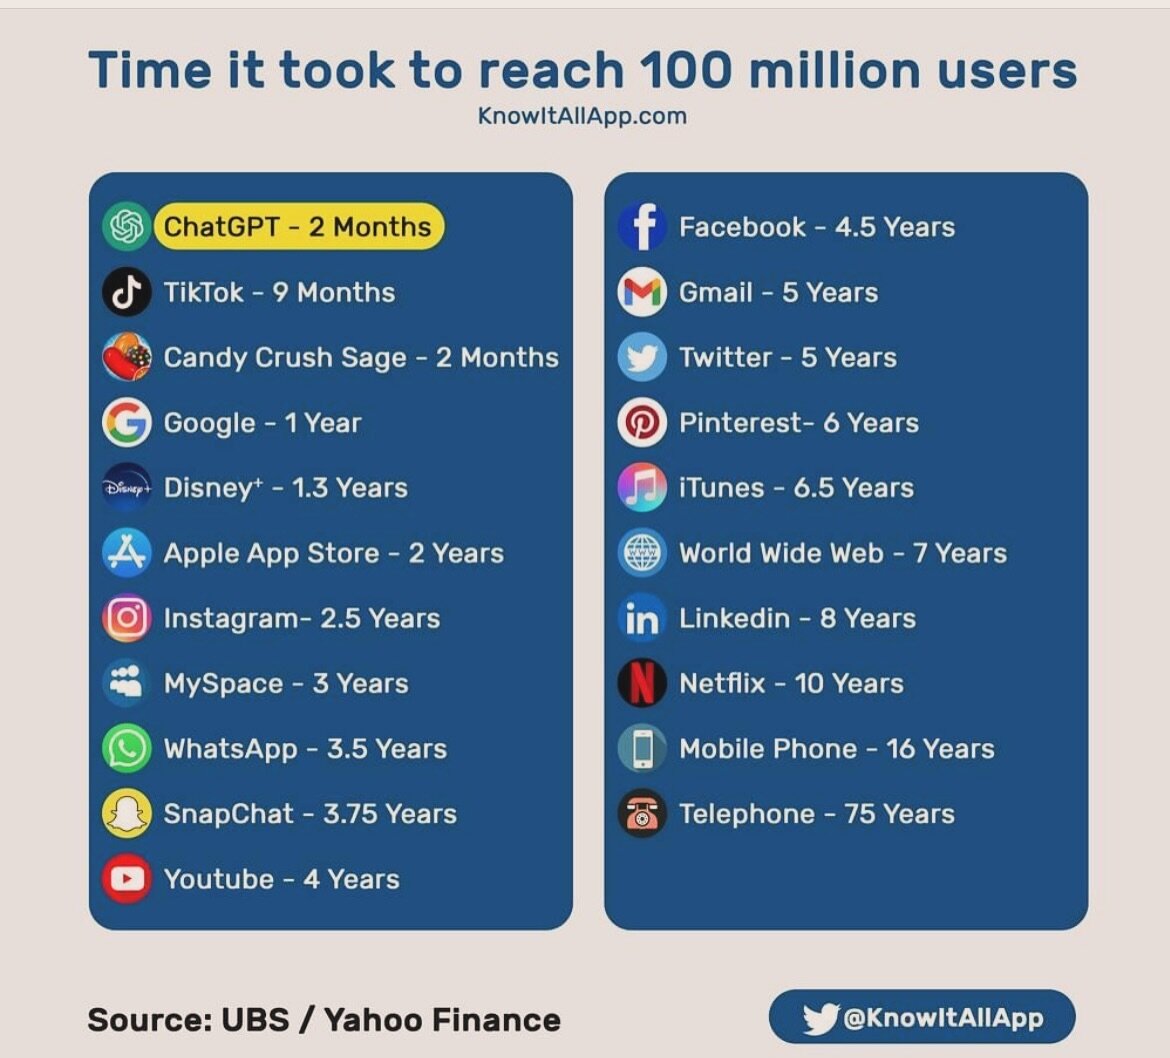 Witnessing the speed of digital adoption in one photo! 🚀 From the days it took the telephone to connect millions to ChatGPT&rsquo;s record in just 2 months, each leap in technology brings us closer faster. 

What a time to be alive where innovation 